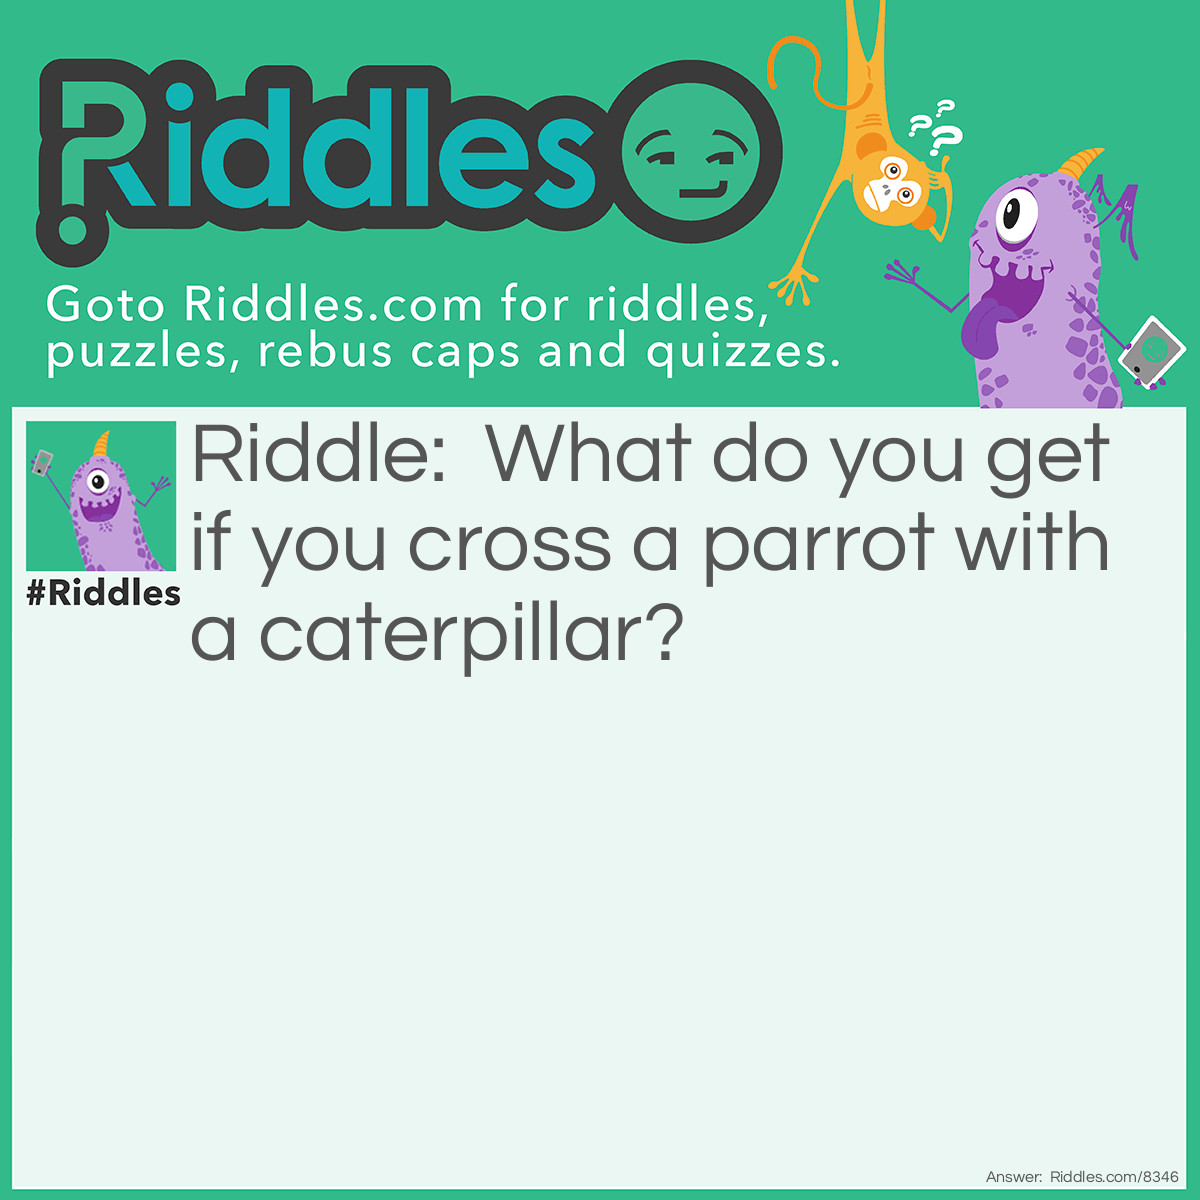 Riddle: What do you get if you cross a parrot with a caterpillar? Answer: A walkie-talkie! Because parrots talk and caterpillars walk! HA!